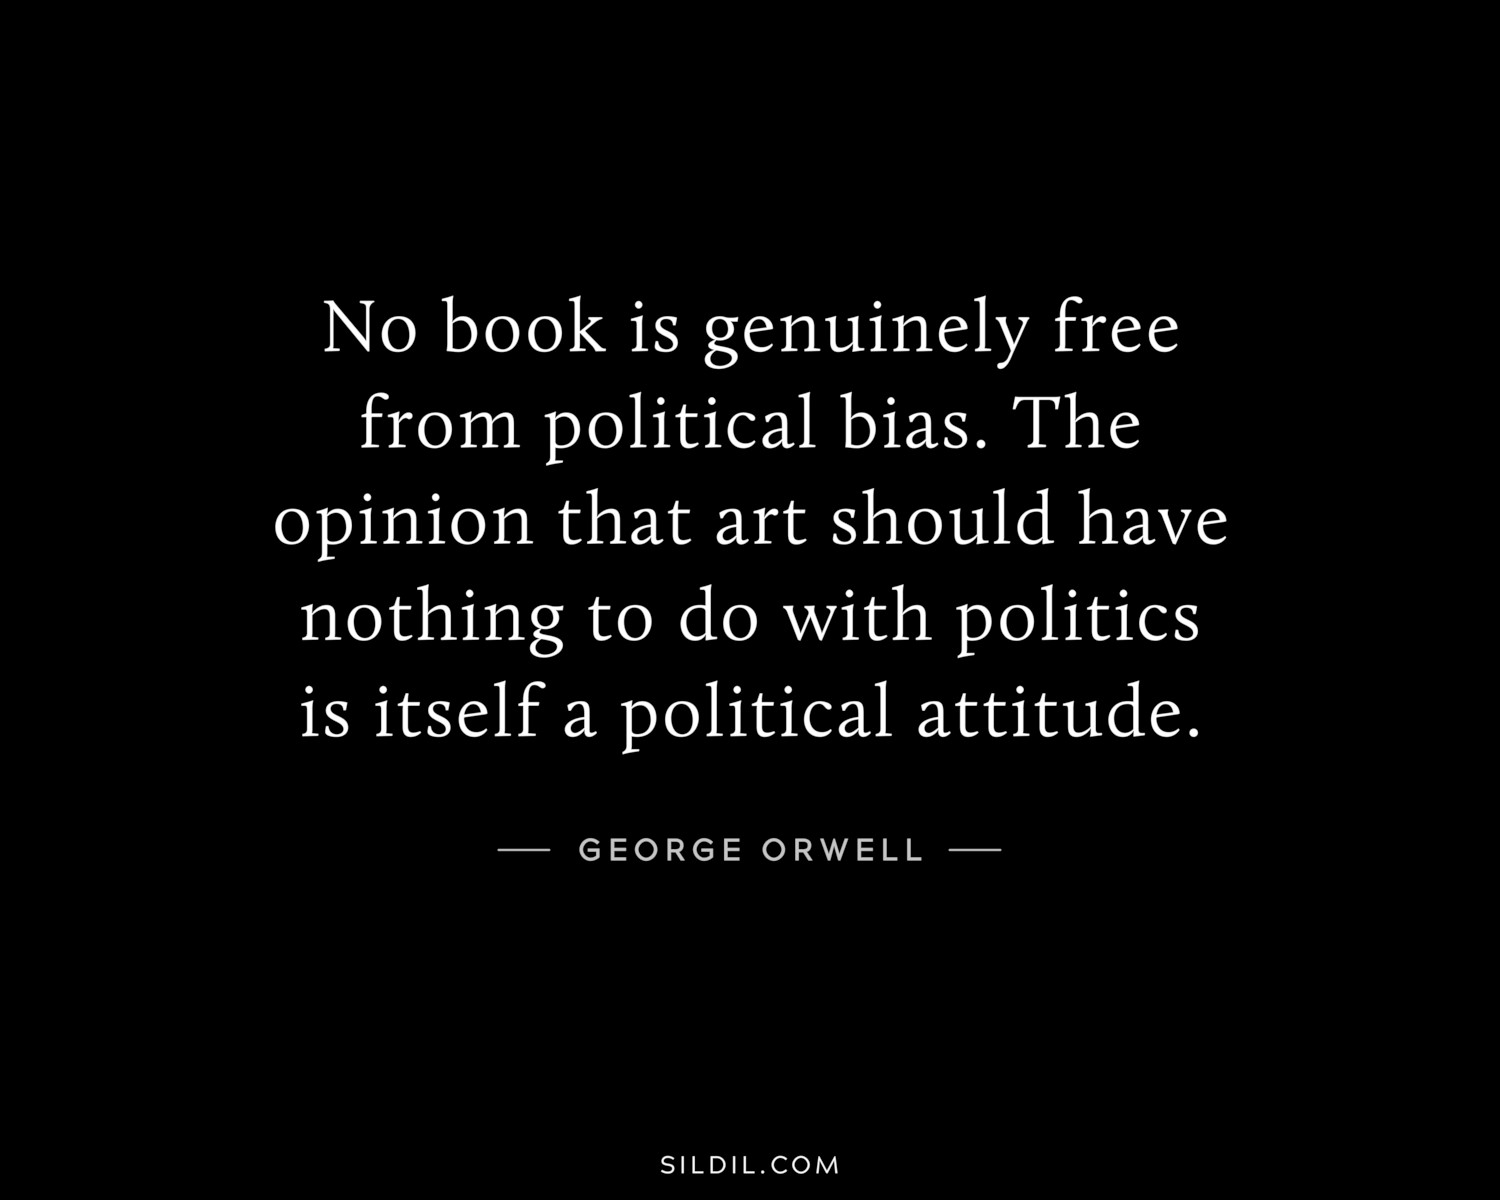 No book is genuinely free from political bias. The opinion that art should have nothing to do with politics is itself a political attitude.